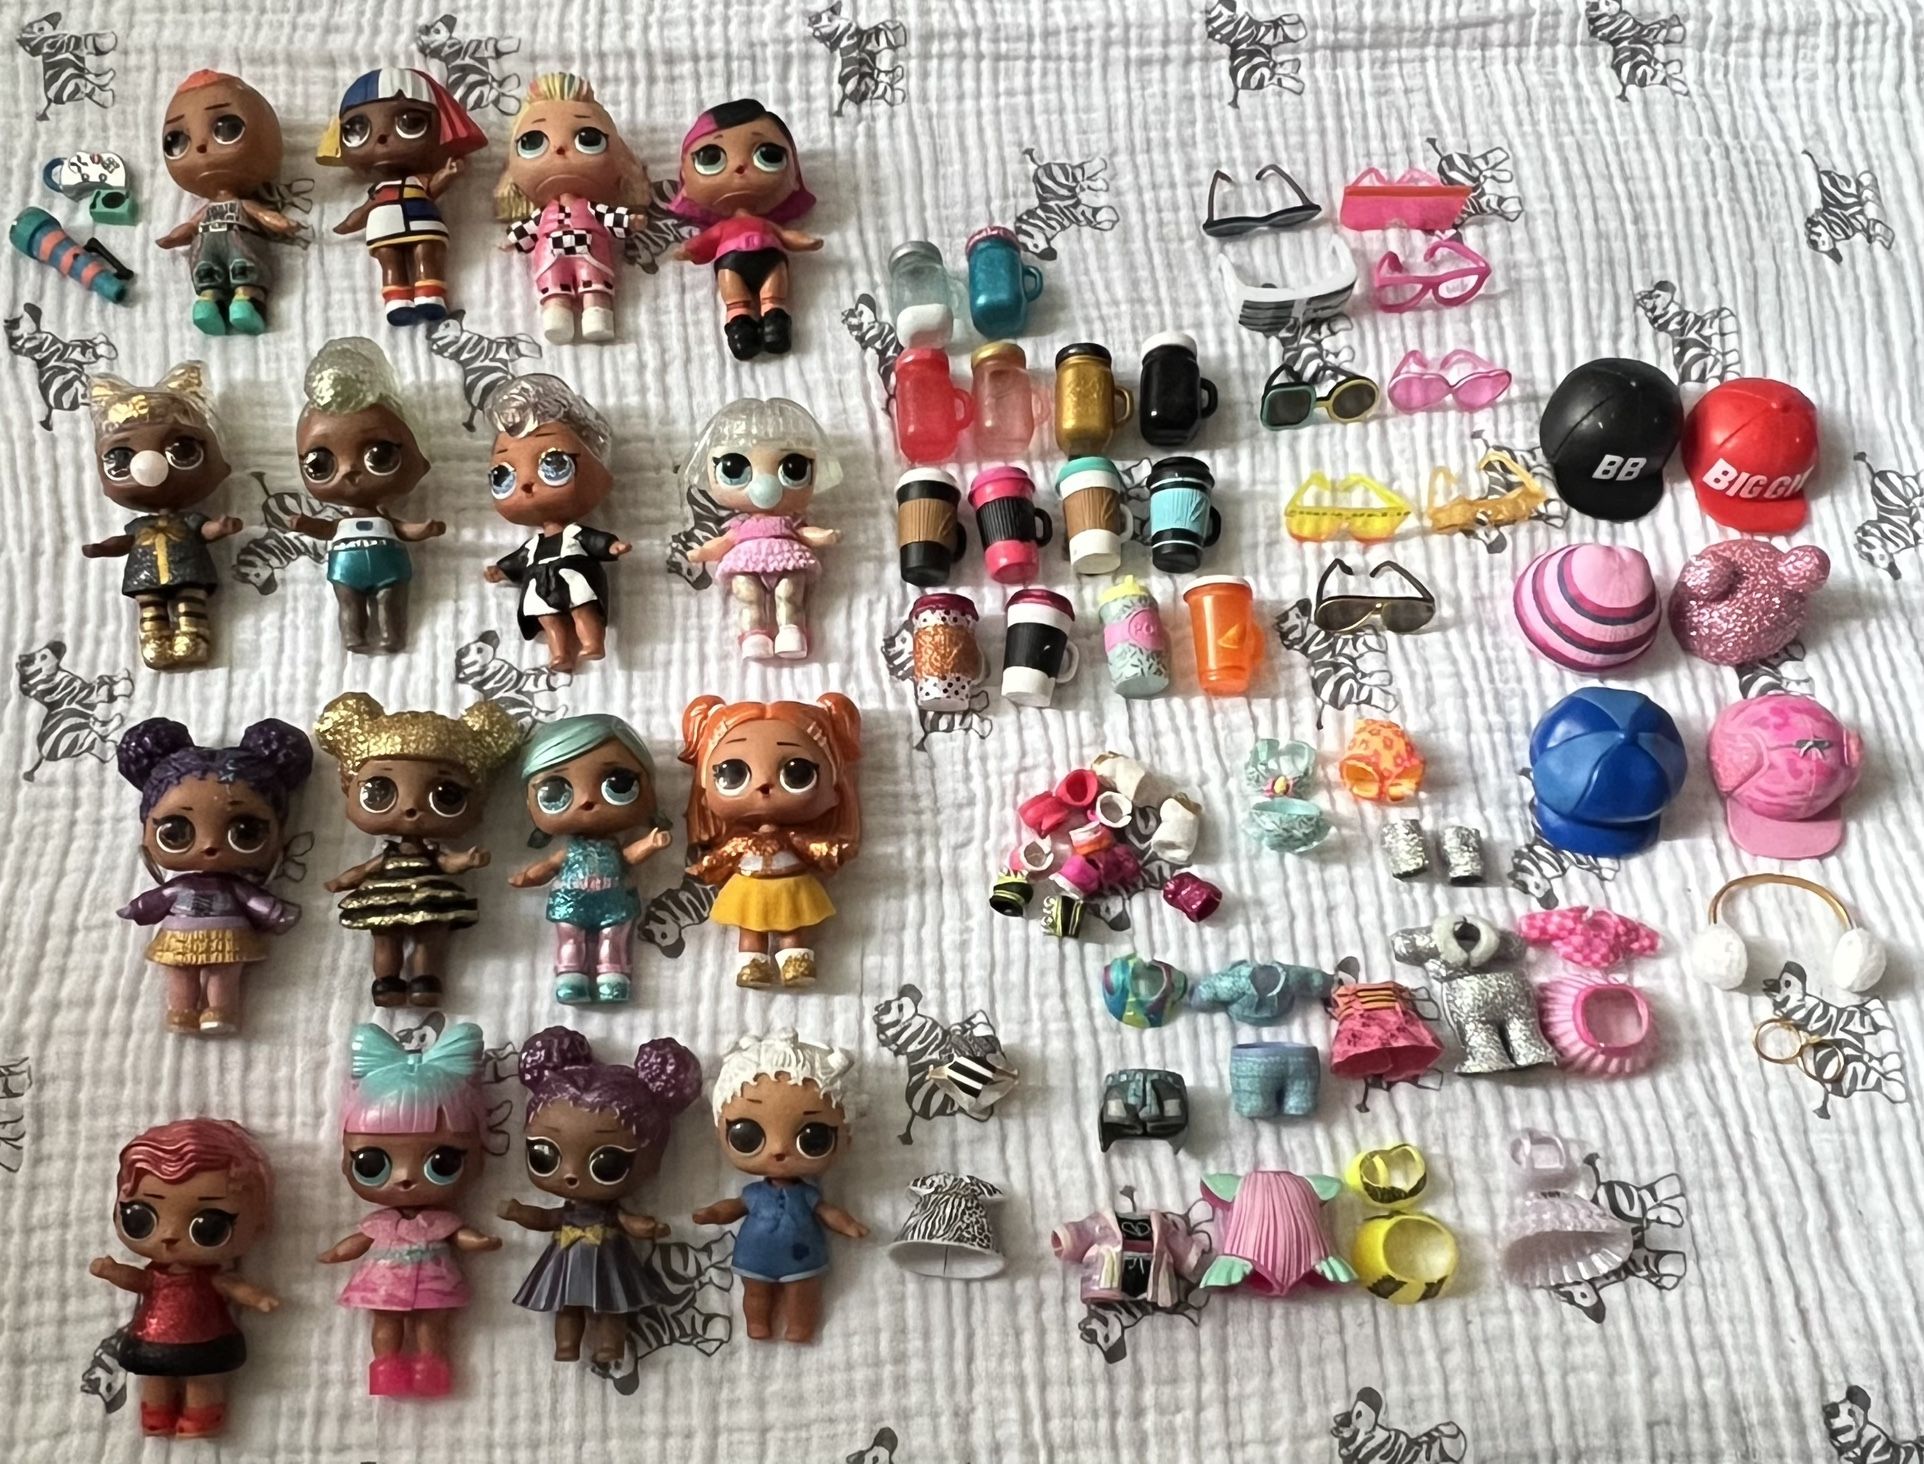  lol Dolls (16 and accessories) 